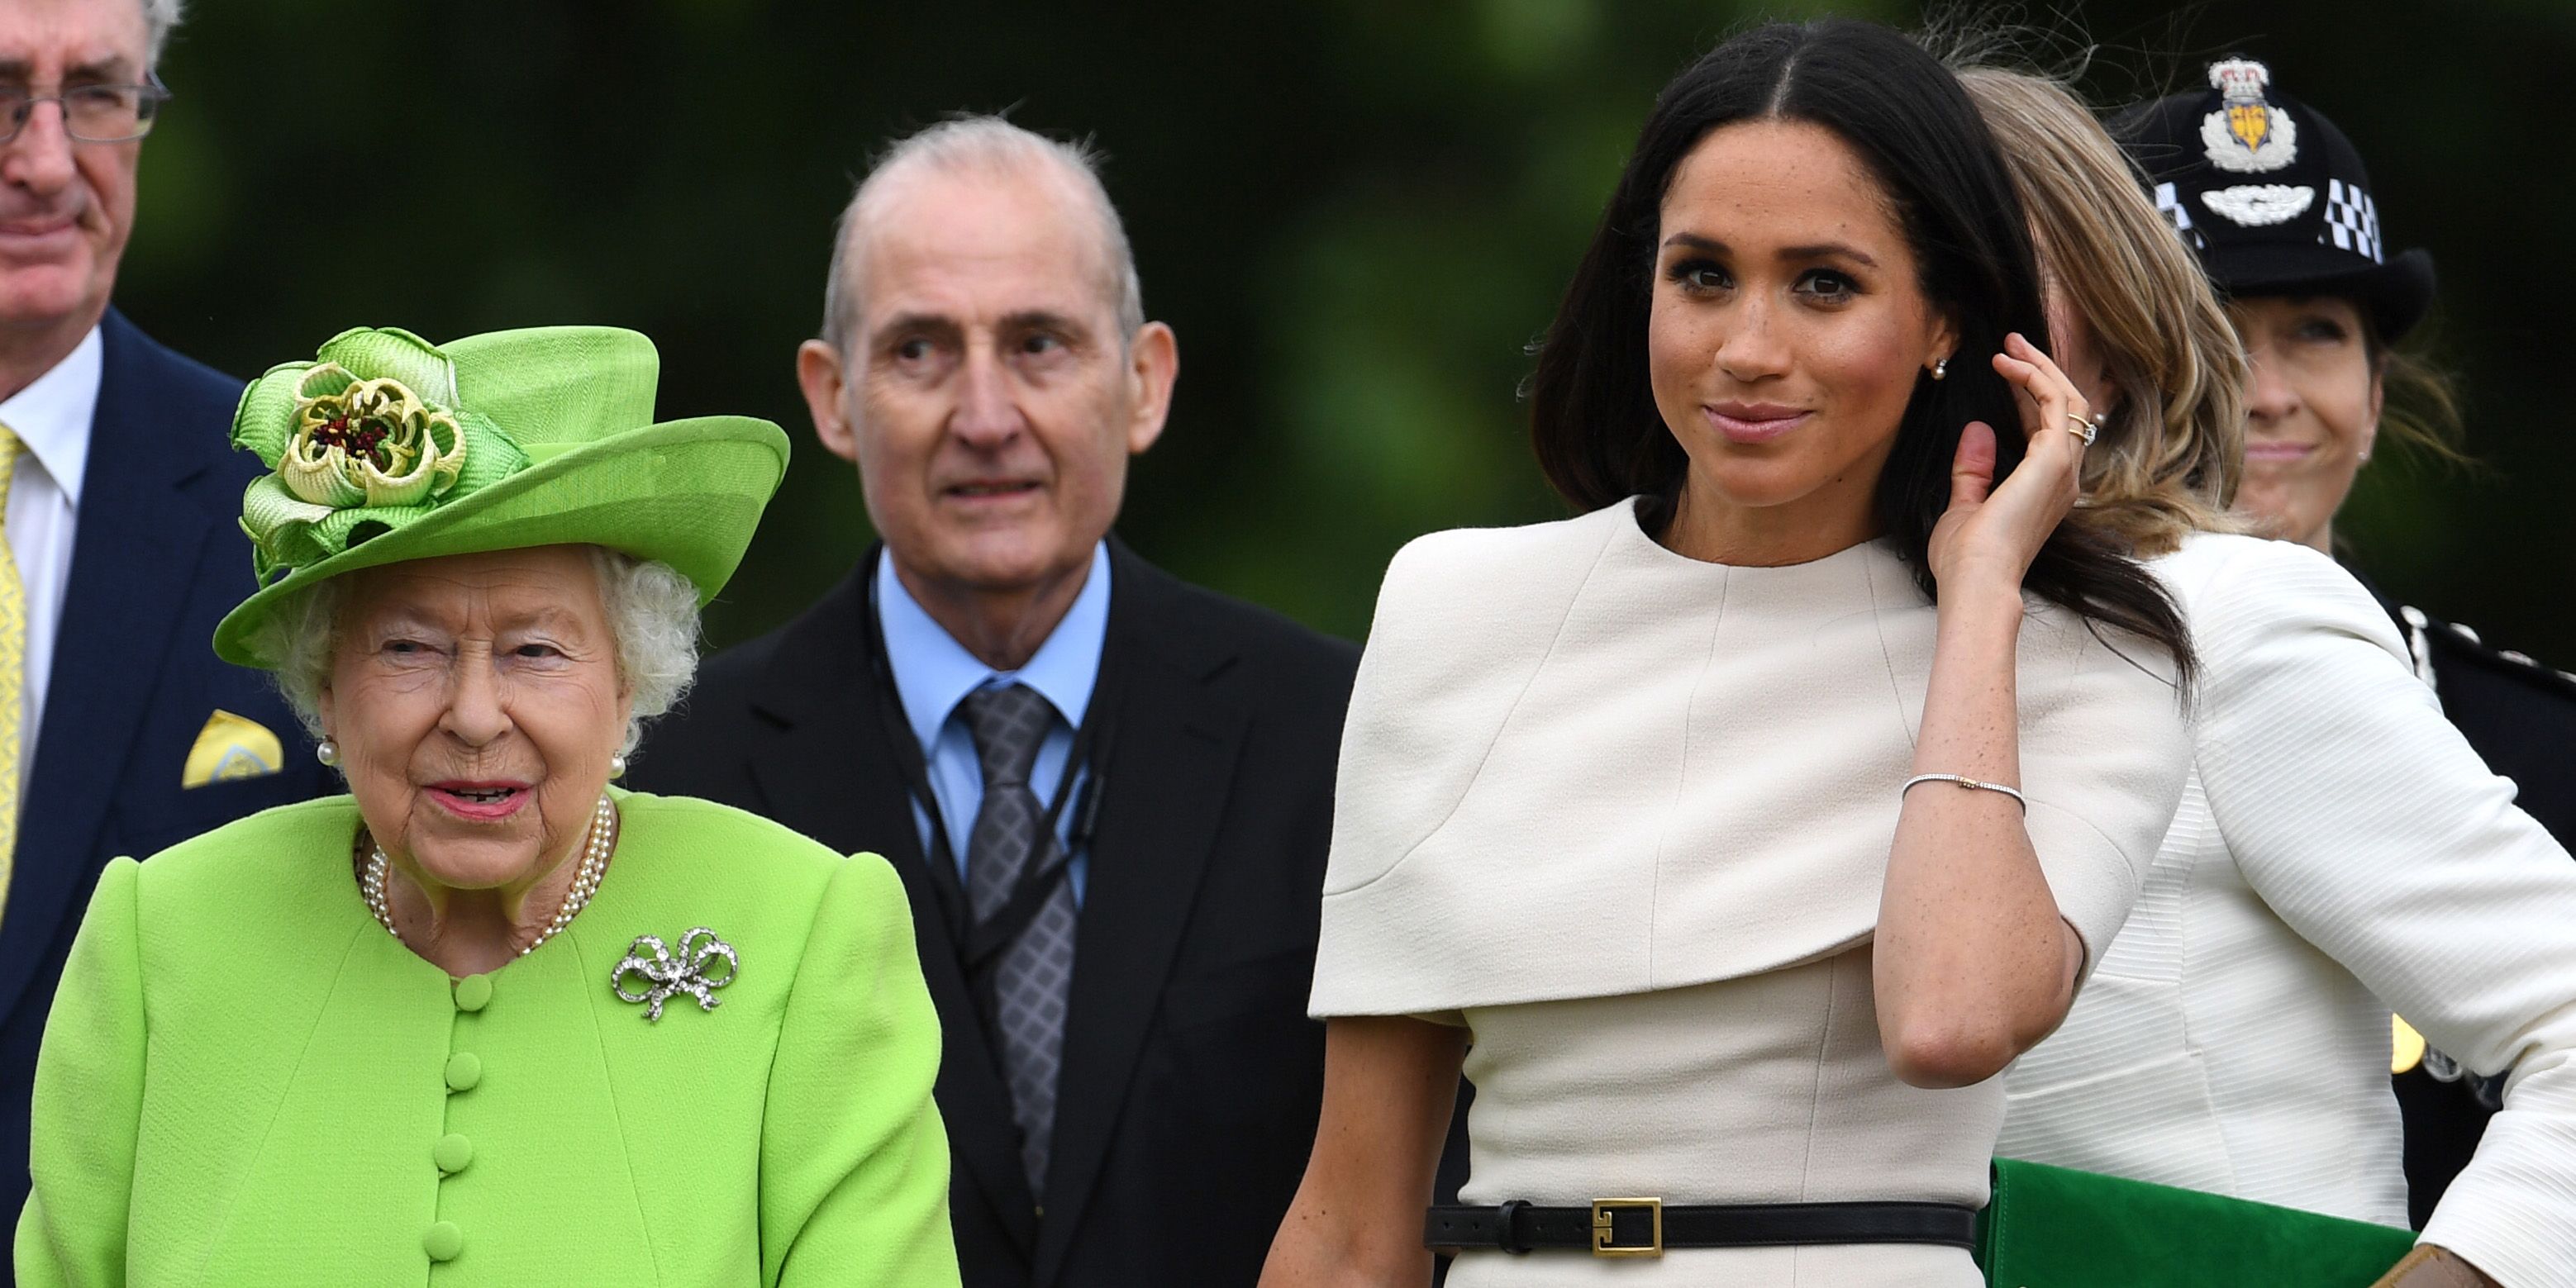 Meghan Markle Wore Givenchy Dress for First Official Royal Event With Queen  Elizabeth